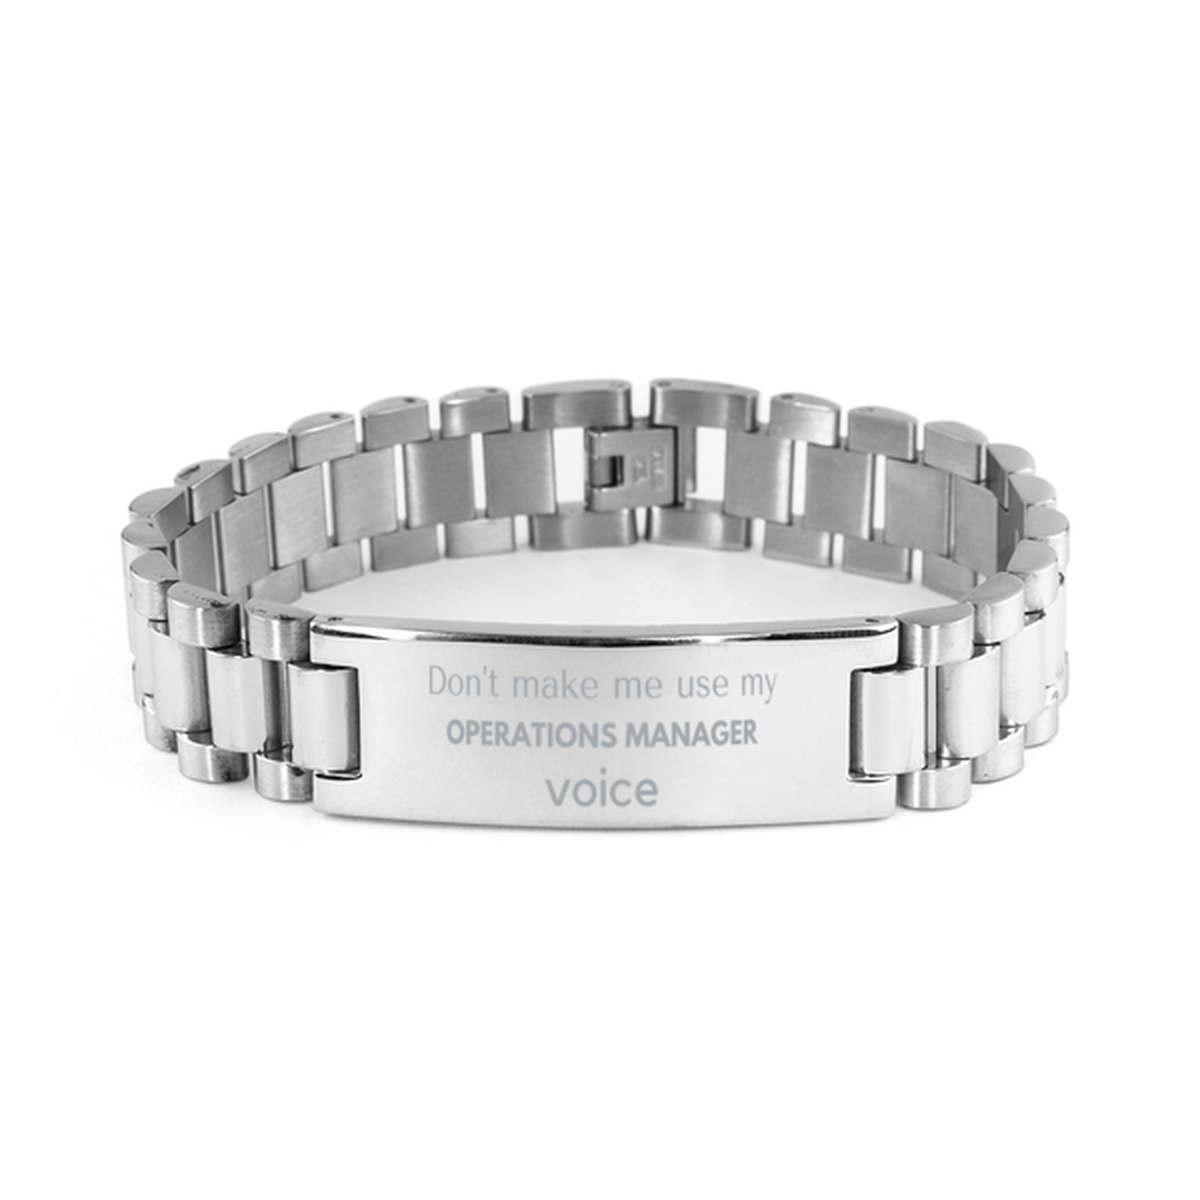 Don't make me use my Operations Manager voice, Sarcasm Operations Manager Gifts, Christmas Operations Manager Ladder Stainless Steel Bracelet Birthday Unique Gifts For Operations Manager Coworkers, Men, Women, Colleague, Friends